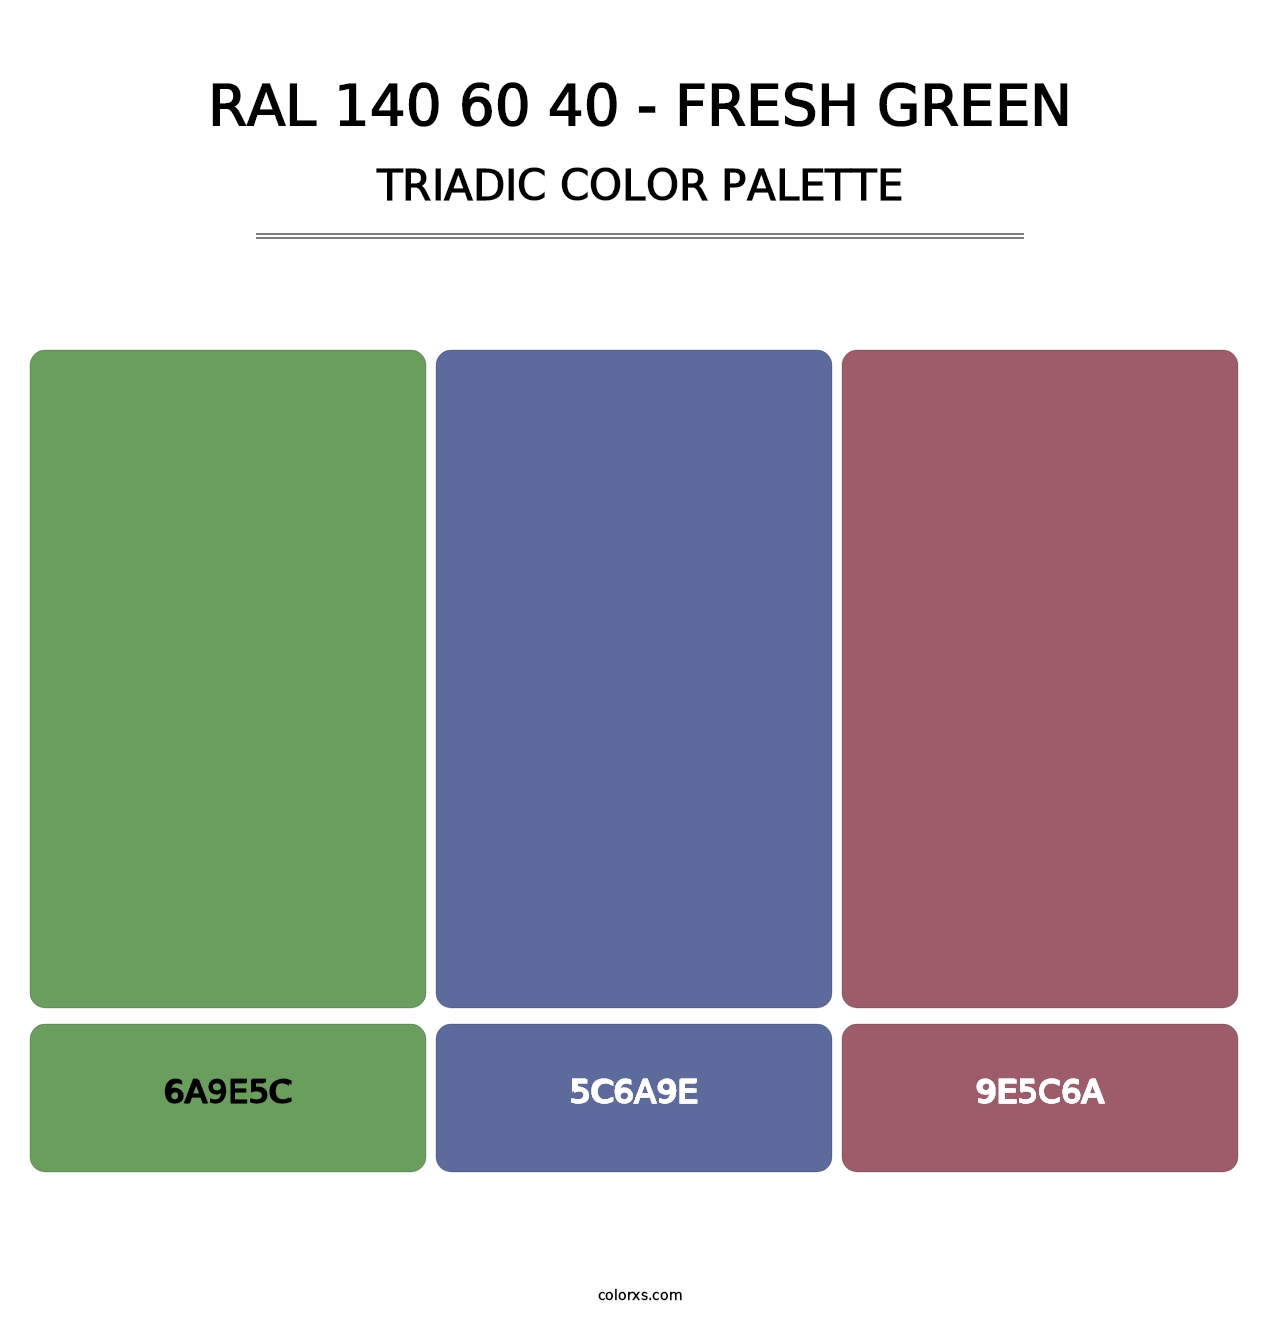 RAL 140 60 40 - Fresh Green - Triadic Color Palette